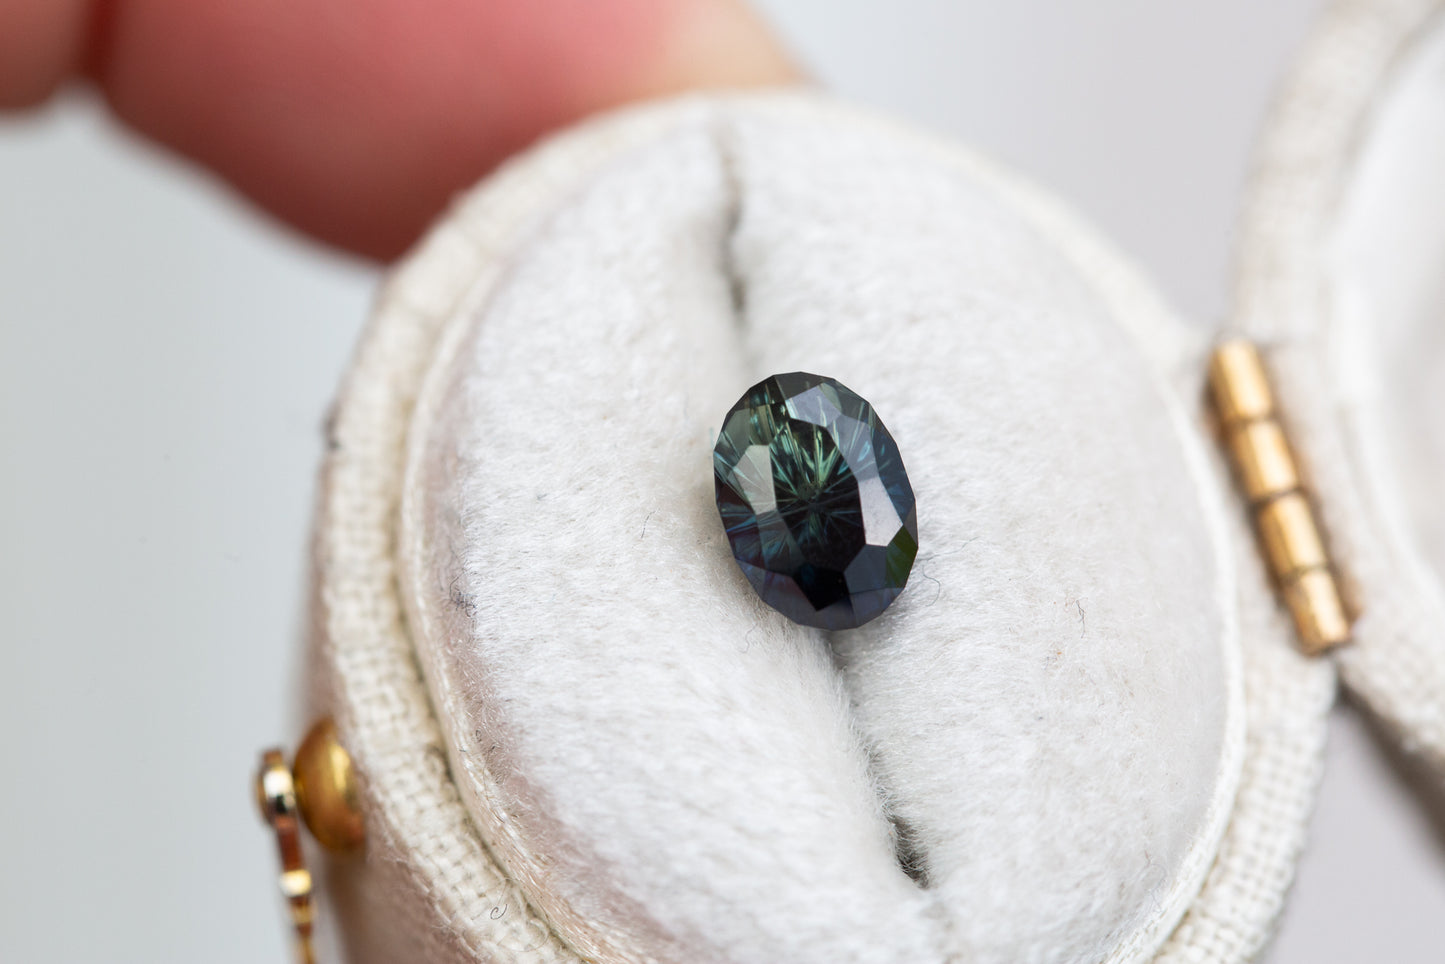 Load image into Gallery viewer, 1.56ct oval dark blue green sapphire (almost black)-Starbrite cut by John Dyer
